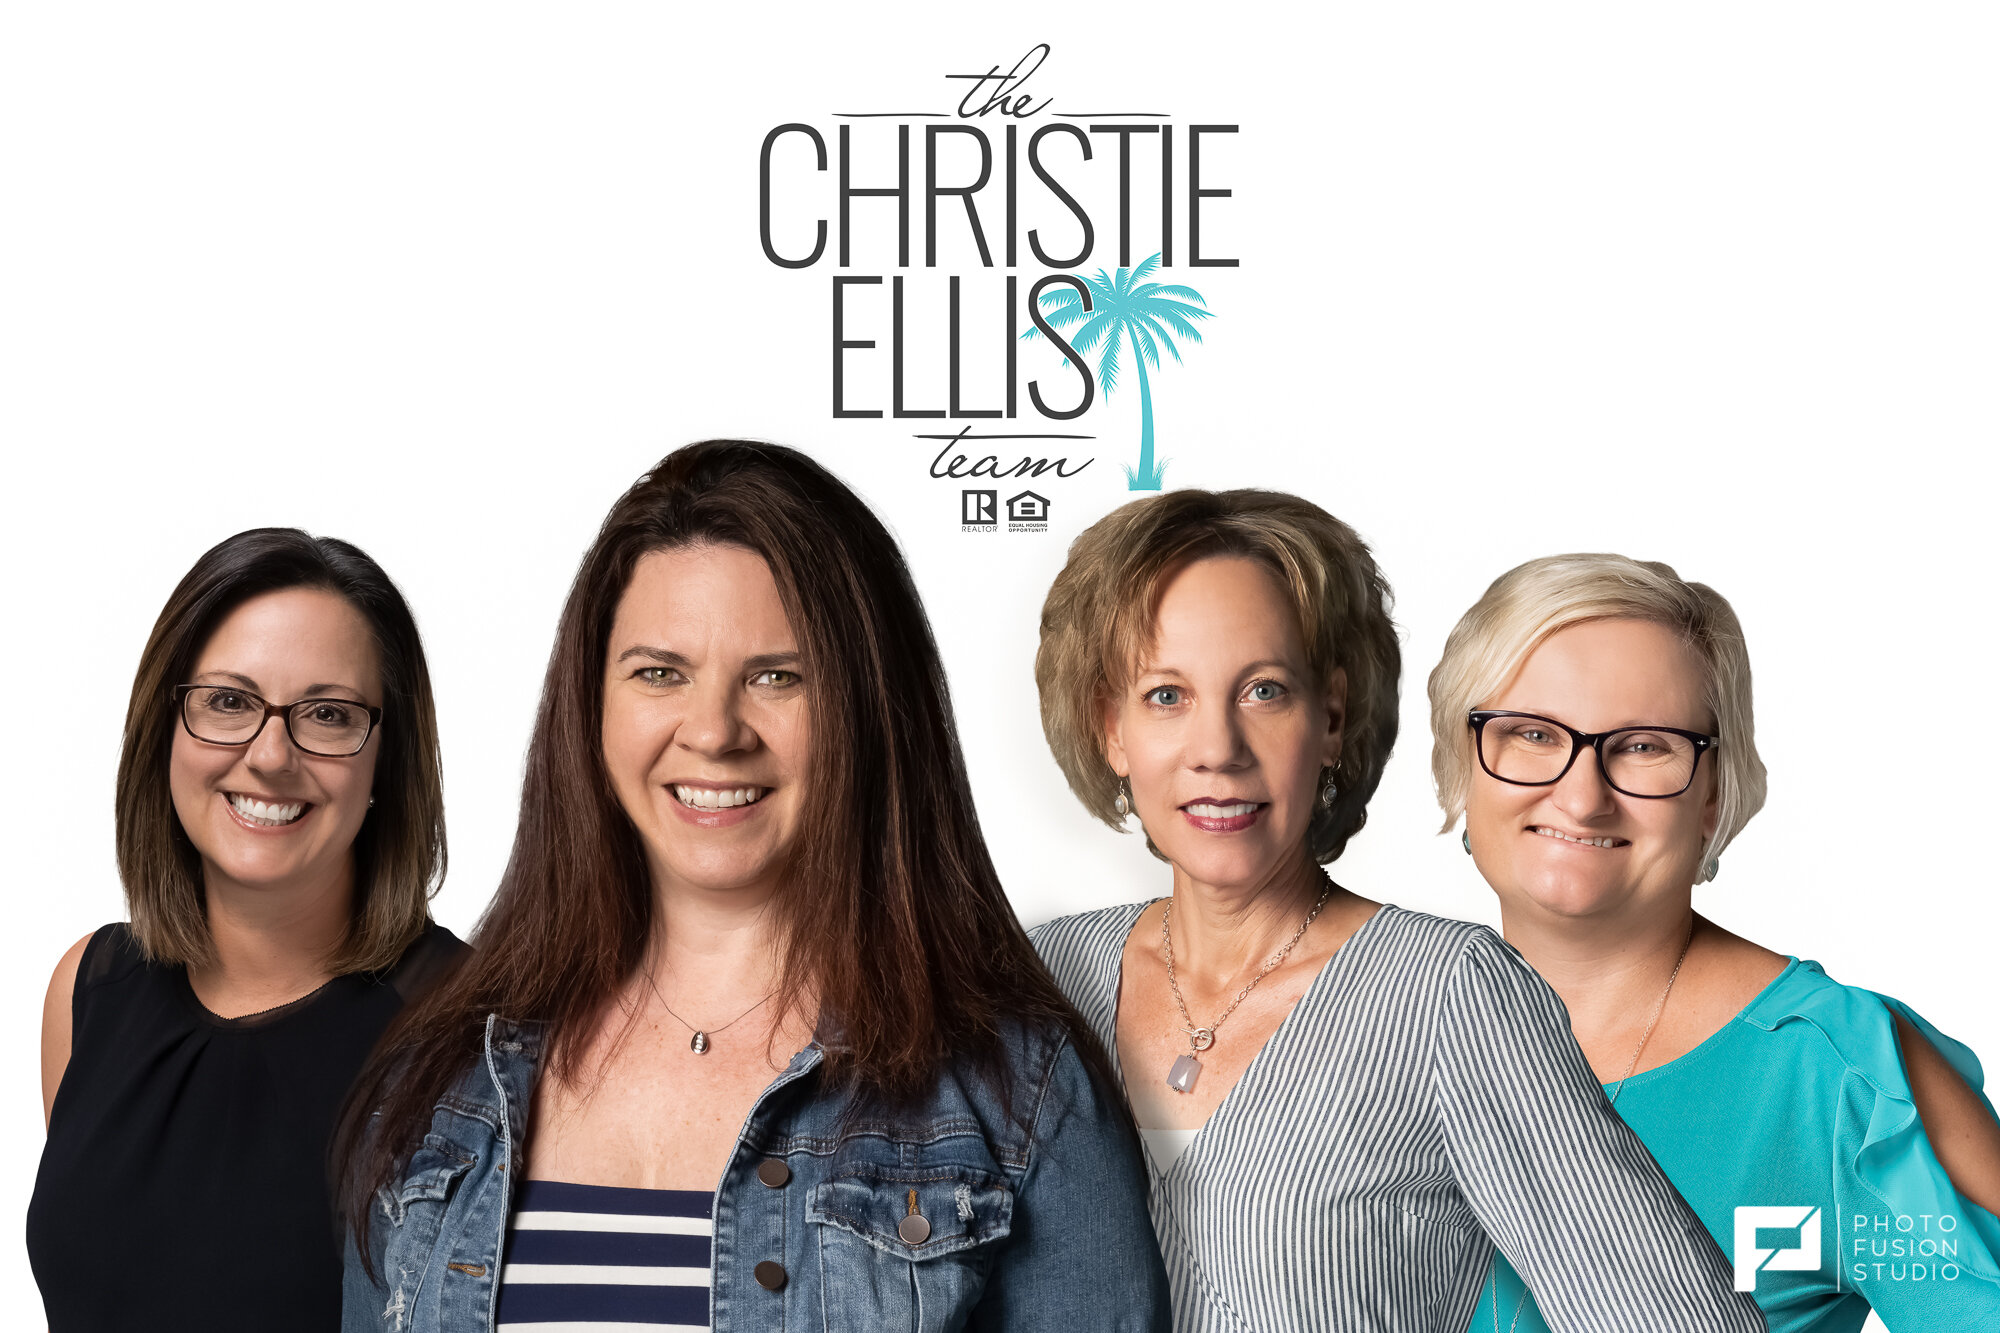 Now flash forward to 2020 and the Christie Ellis Team helps clients buy or sell residential real estate in Phoenix AZ and Myrtle Beach SC. Photo by Everardo Keeme, Photo Fusion Studio